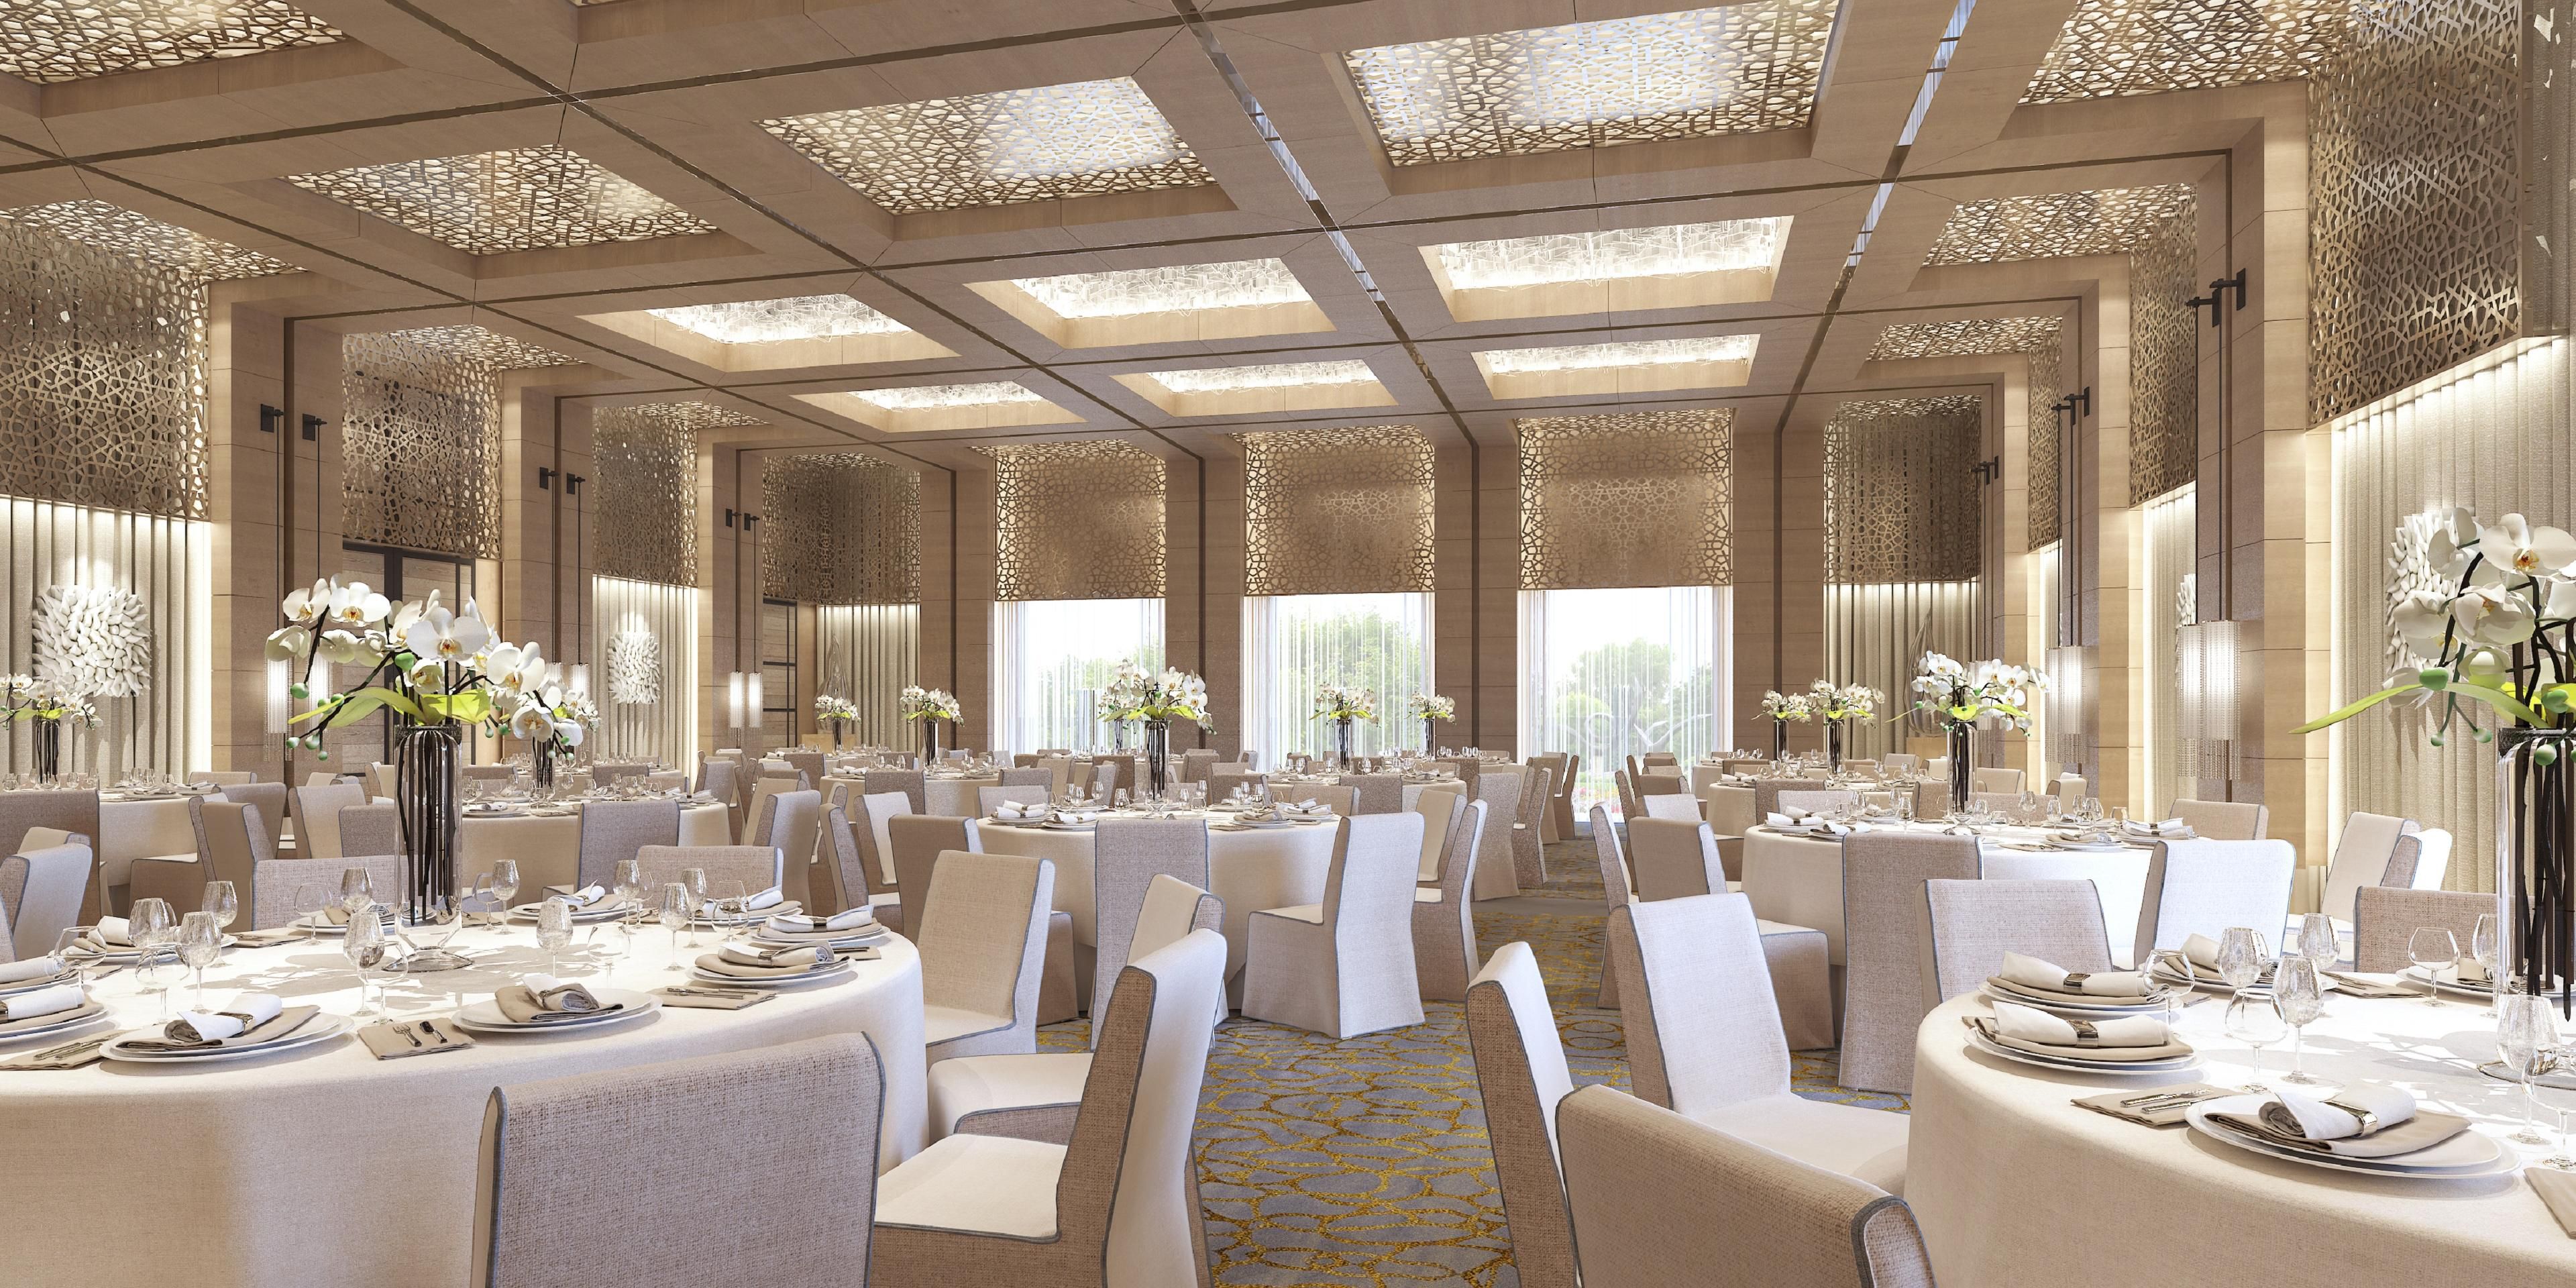 Filled with natural light and overlooking the glistening waters of the Arabian Gulf, our event spaces are the perfect location for your event. From intimate meetings to gala dinners and grand celebrations, our venues are designed to inspire, with a lavish ballroom, six flexible meeting rooms and two boardrooms.